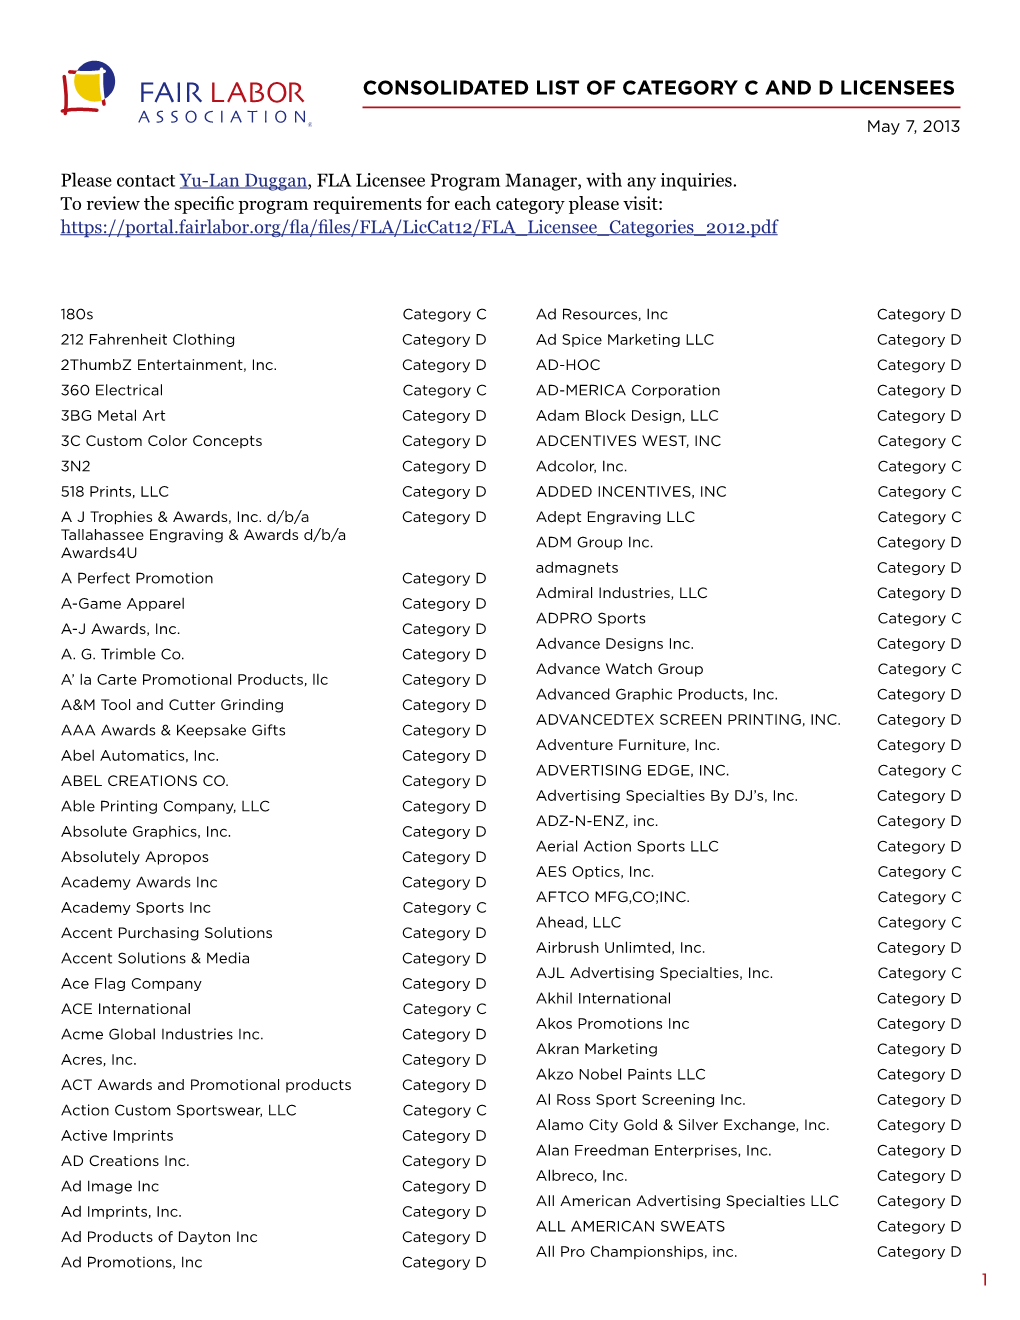 Consolidated List of Category C and D Licensees